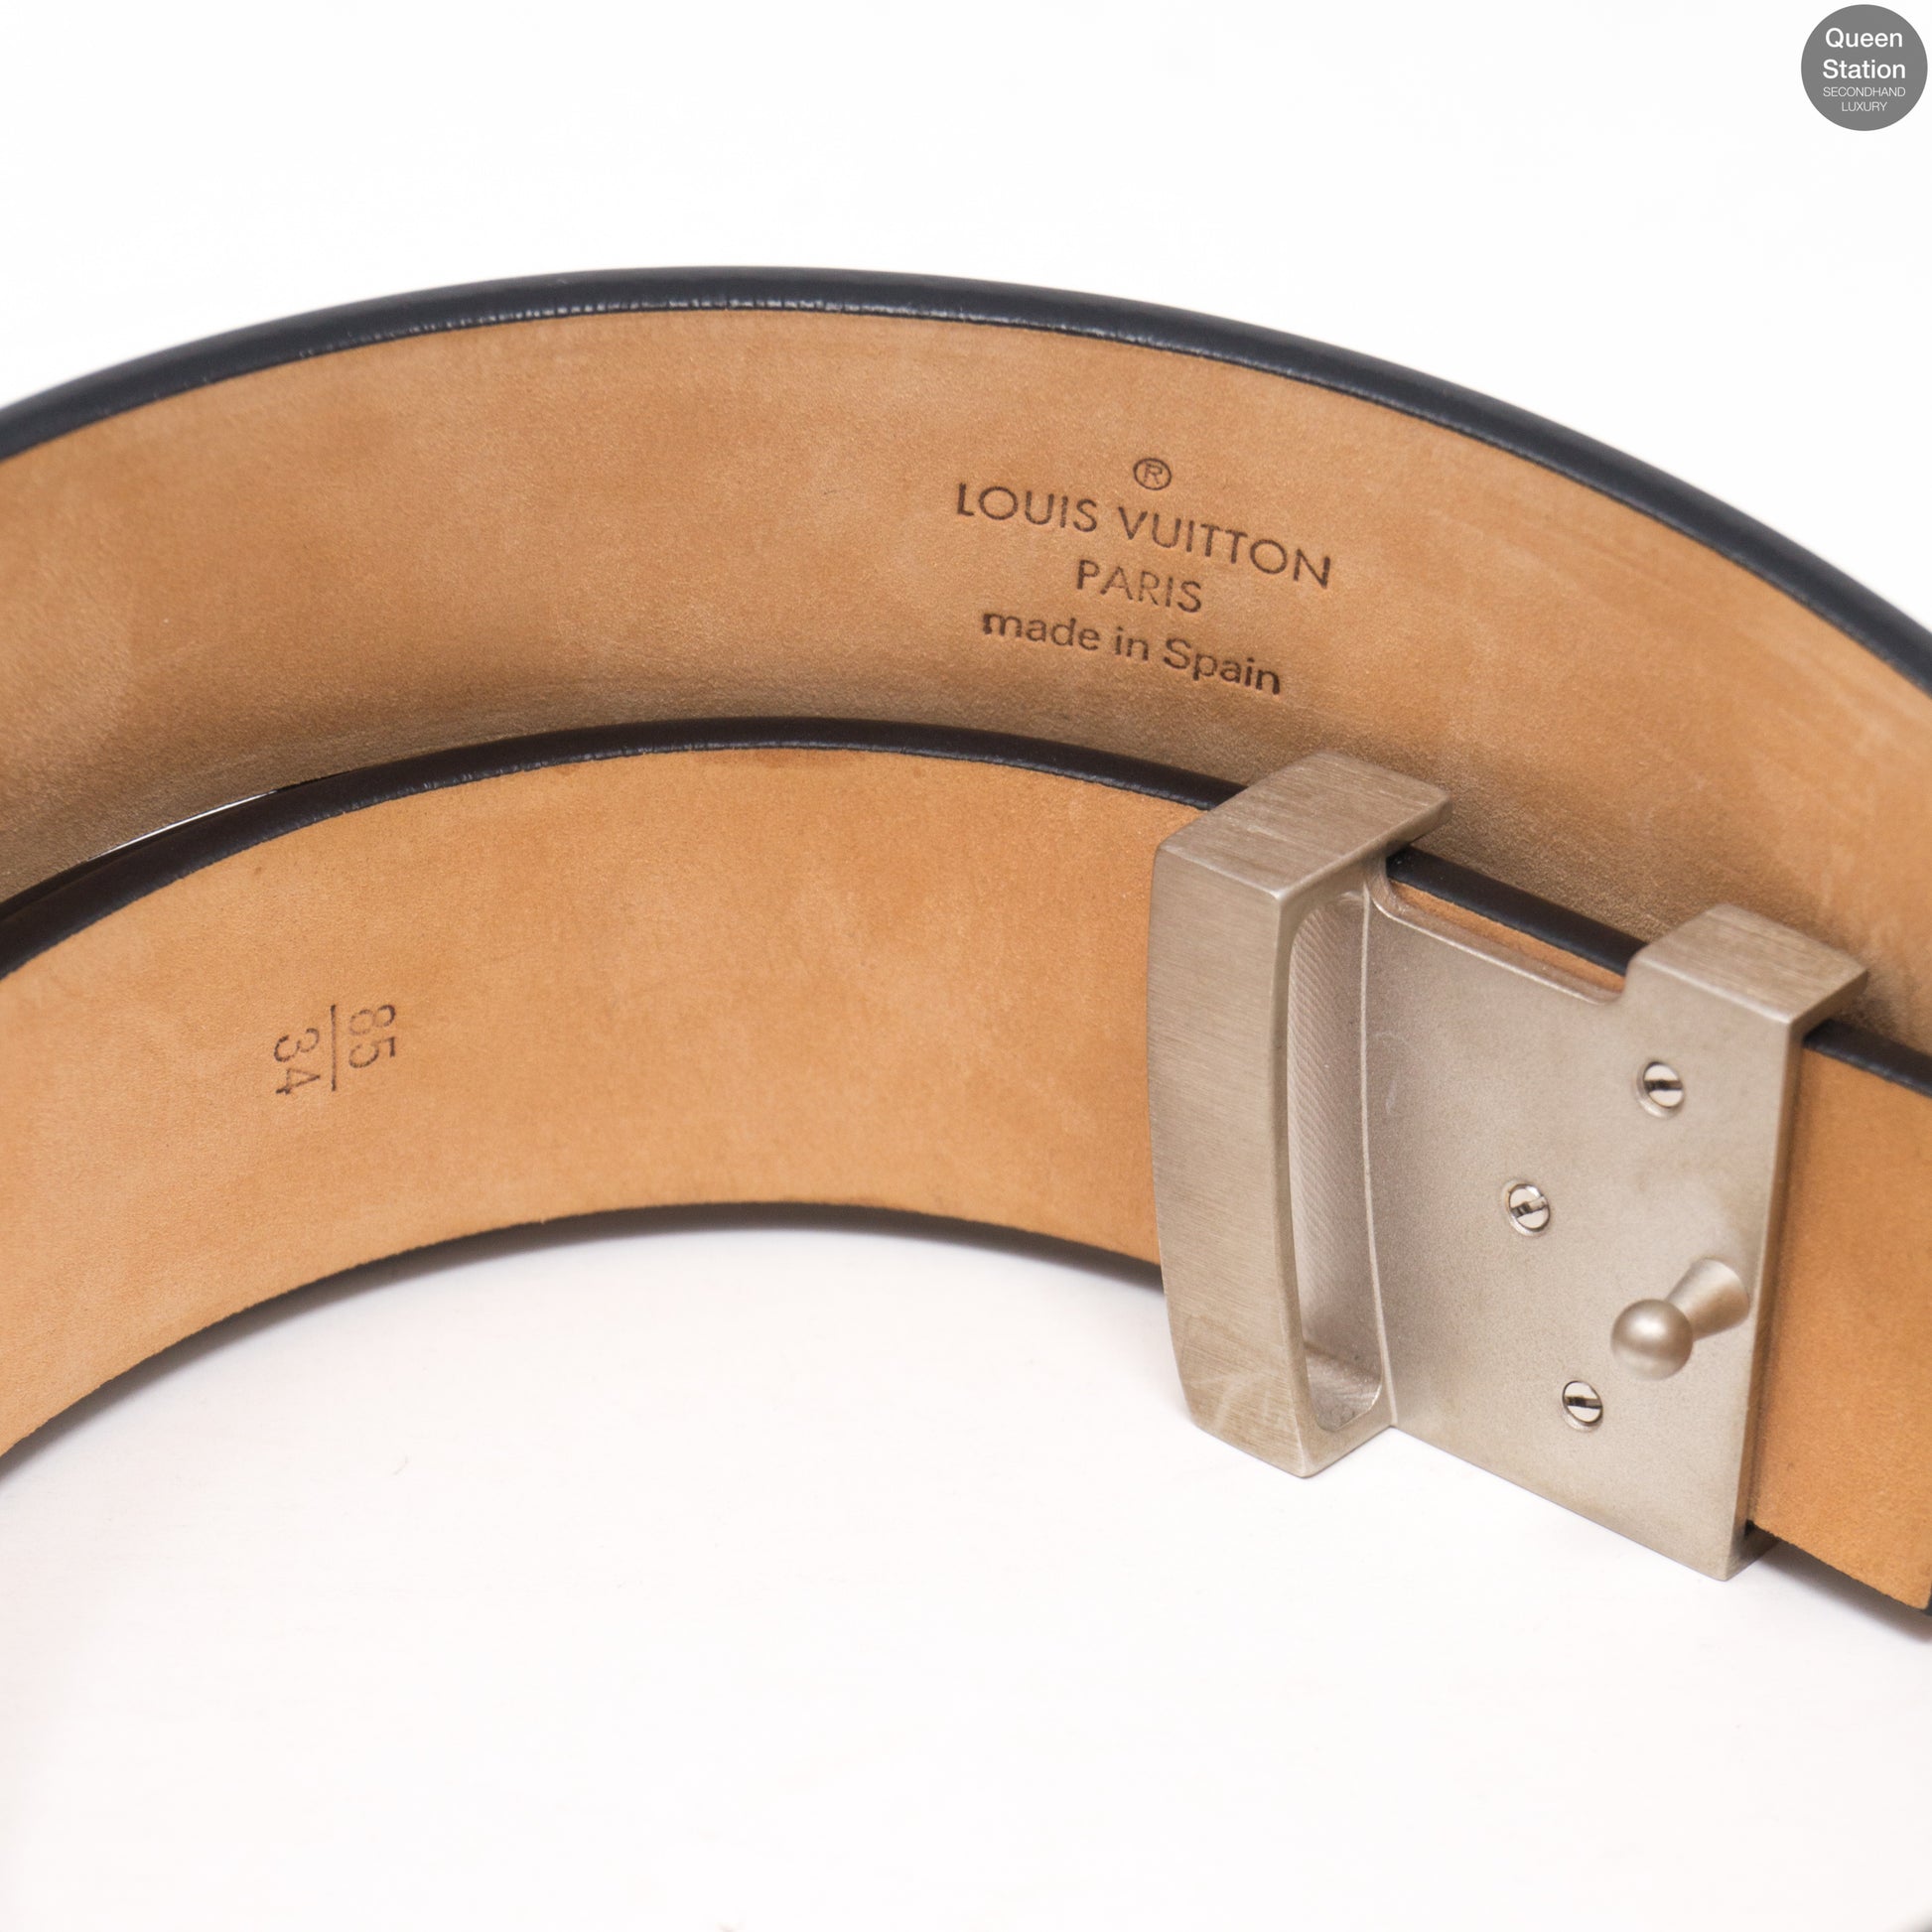 Initiales leather belt Louis Vuitton Black size L International in Leather  - 19491638